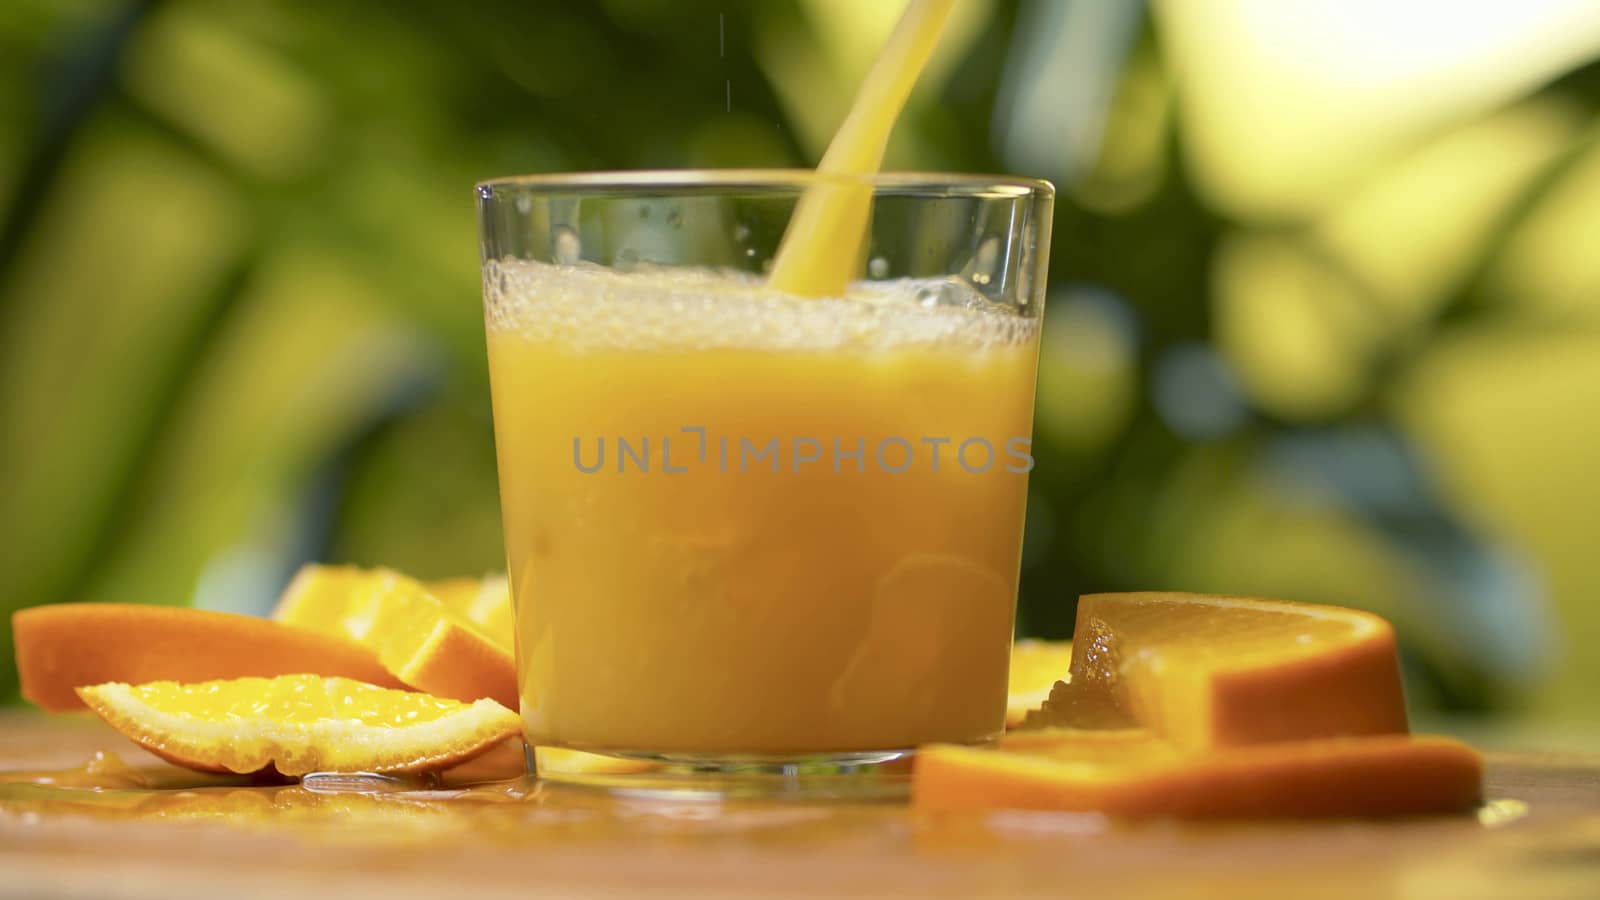 Fresh orange juice pouring into a transparent glass. Close up refreshing yellow beverage on natural background. Sliced oranges on a table. Healthy lifestyle concept.